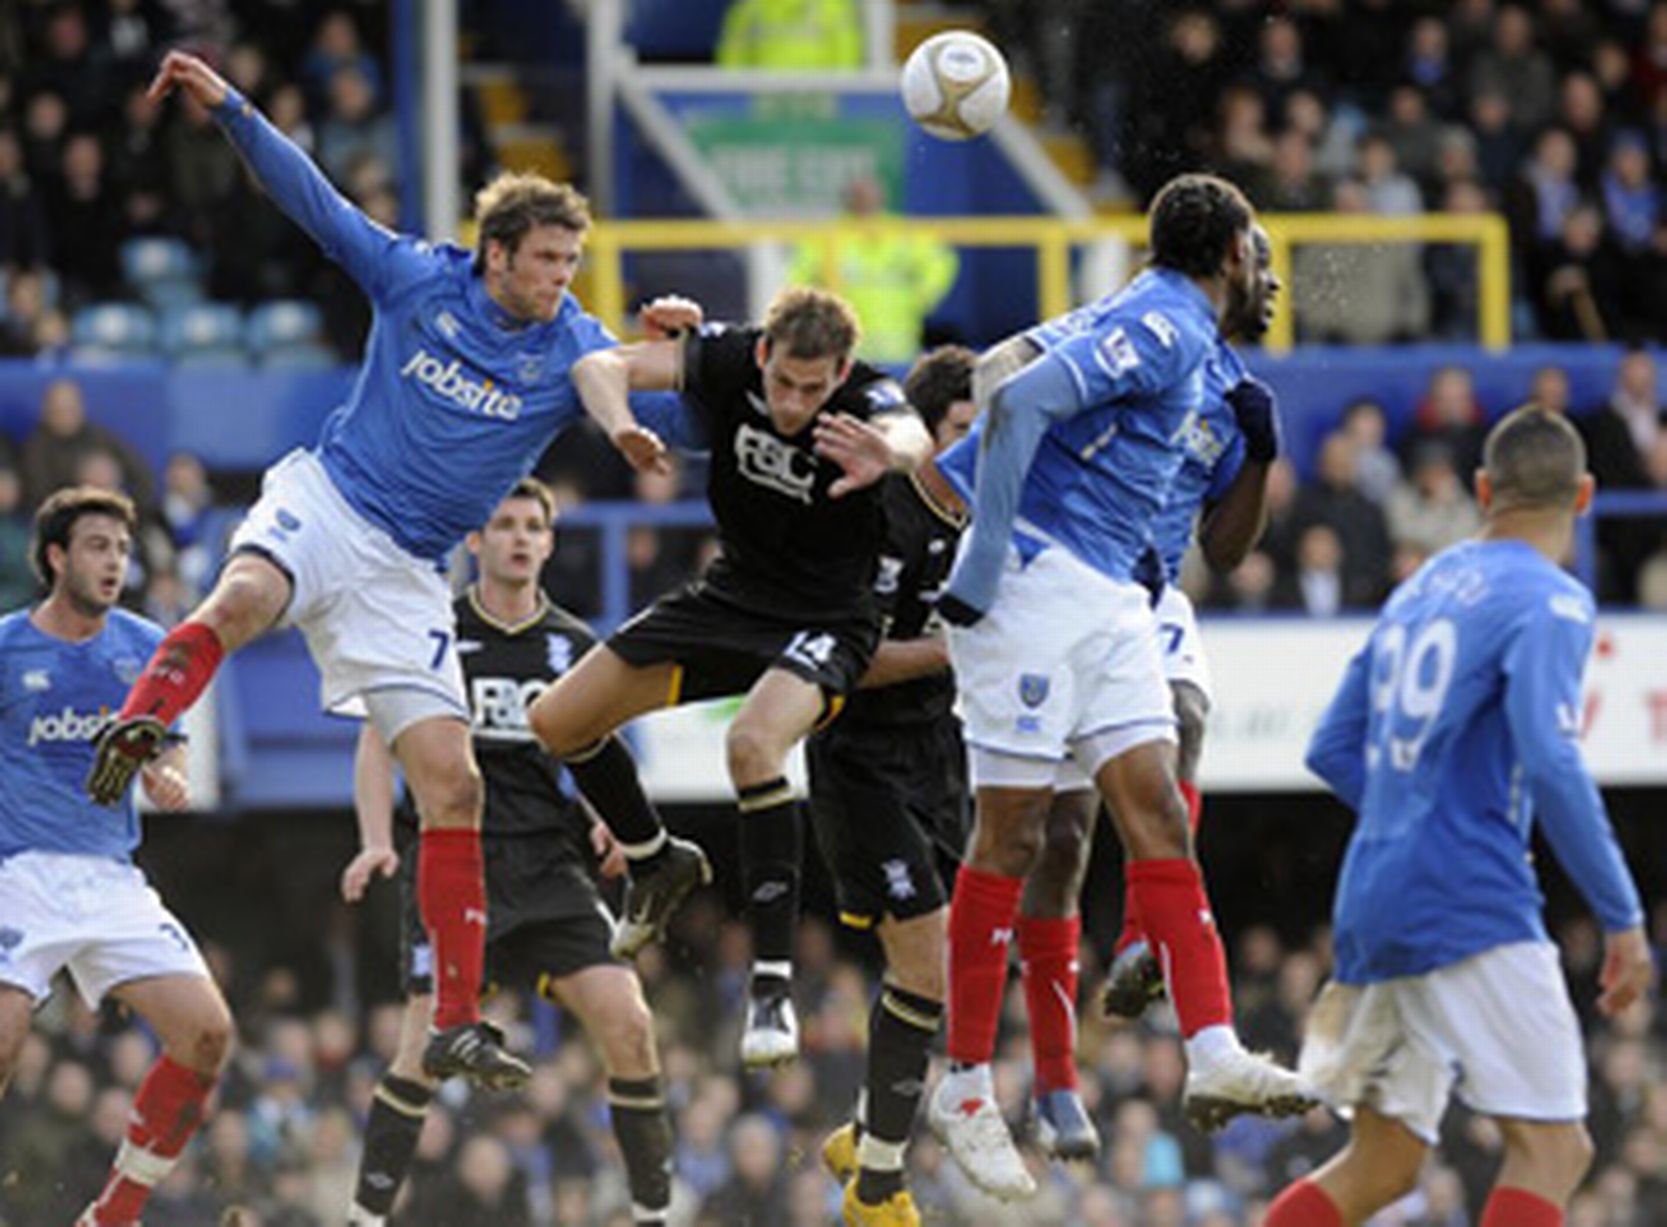 image-6-for-portsmouth-v-birmingham-city-the-match-in-pictures-gallery-26097389